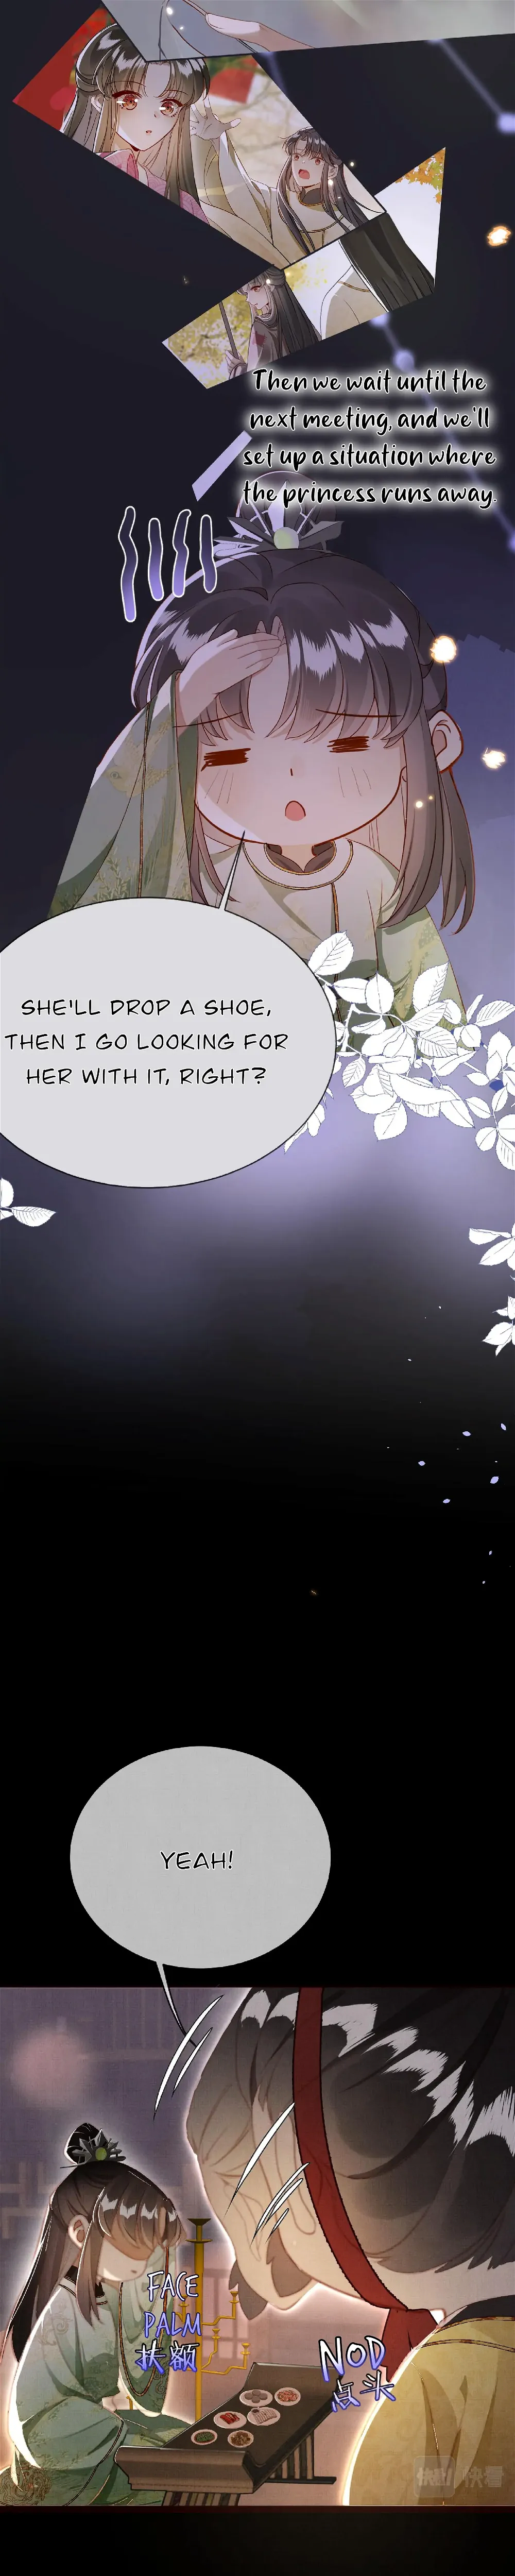 A Nest Of Phoenixes chapter 3 - Page 14